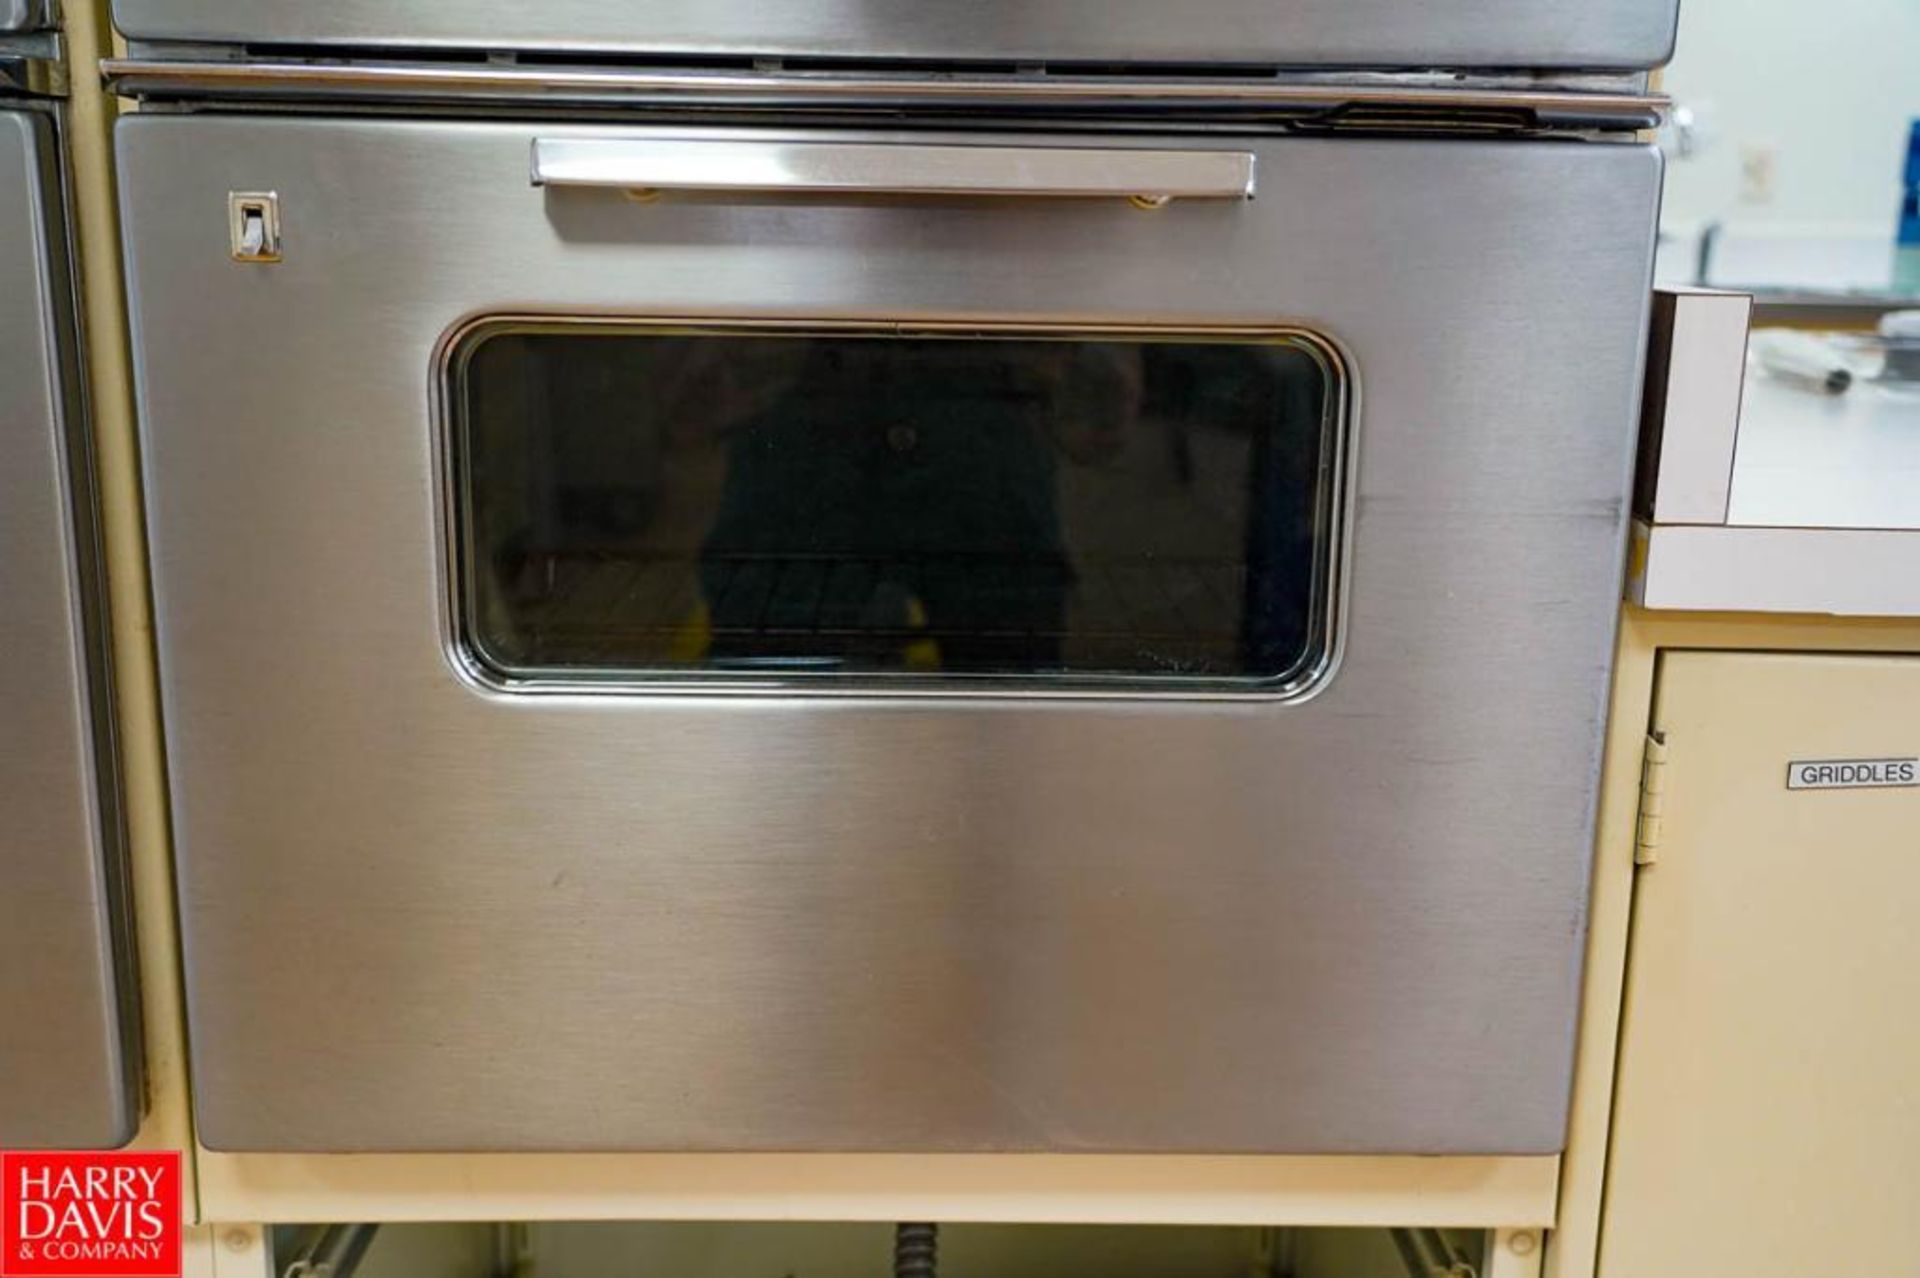 General Electric Double Oven 26'' x 27'' x 87'' Tall, Max Temp 500 and Broil - Rigging Fee: $100 - Image 3 of 6